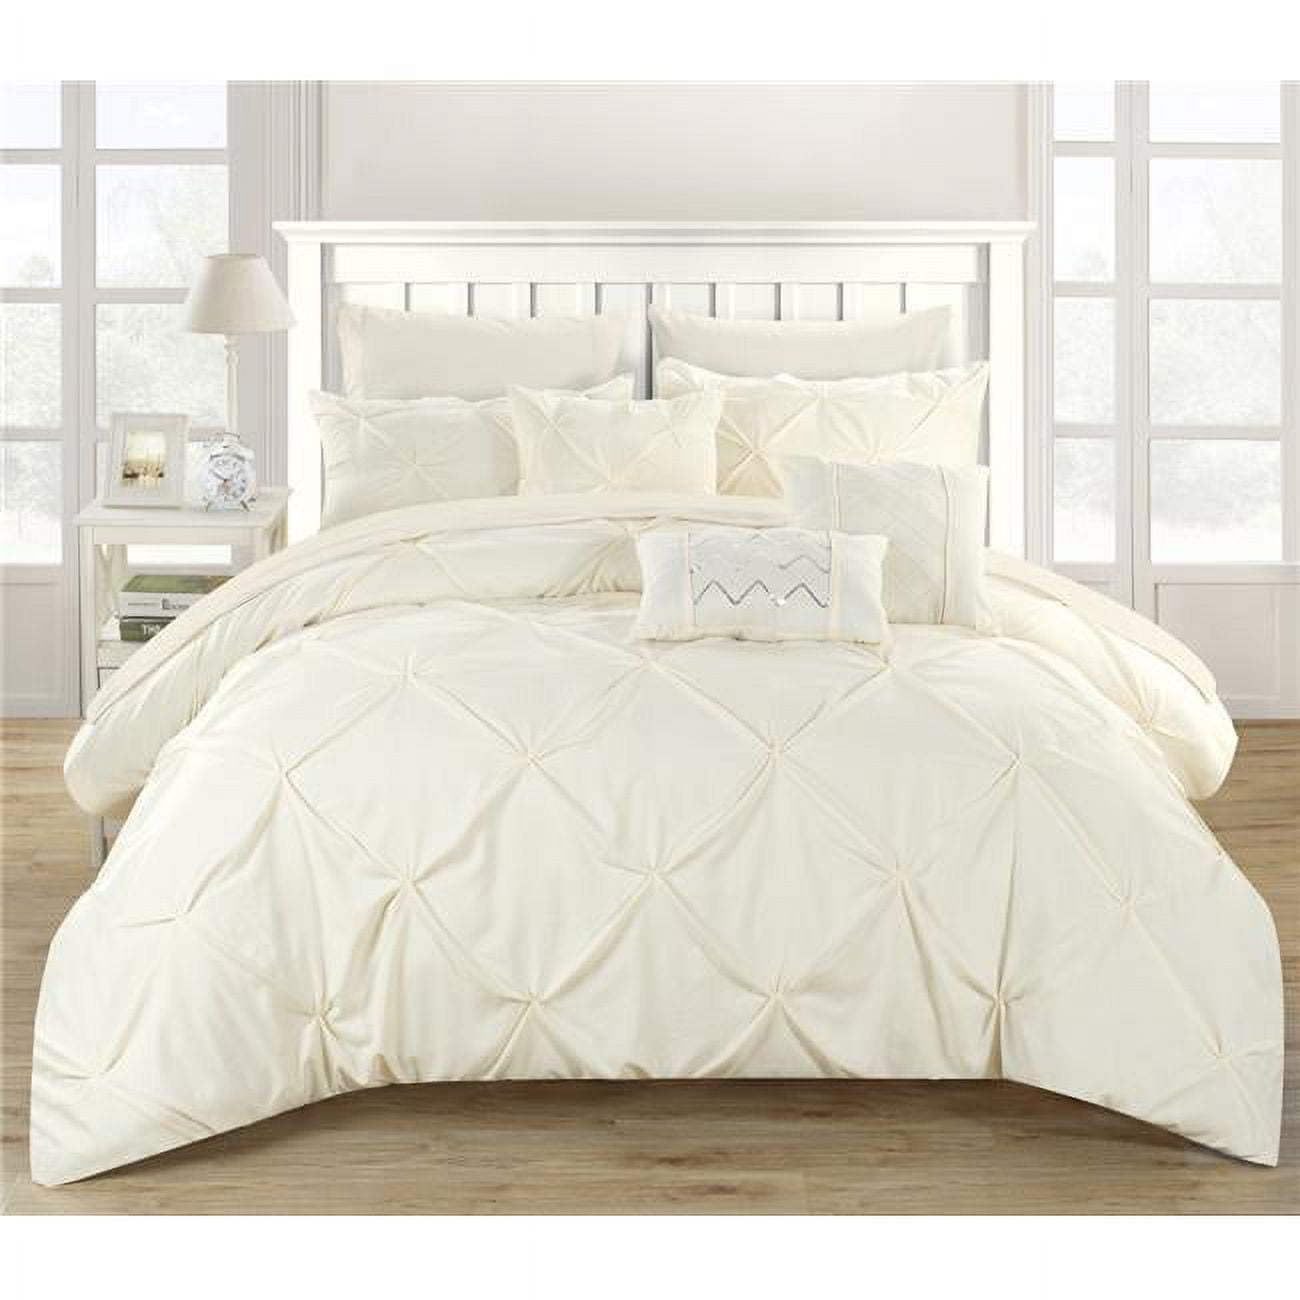 Cs3395-us Twin Size Zita Pinch Pleated, Ruffled And Pleated Complete Bed Sheets Set & Deocrative Pillows Included, Beige - 8 Piece